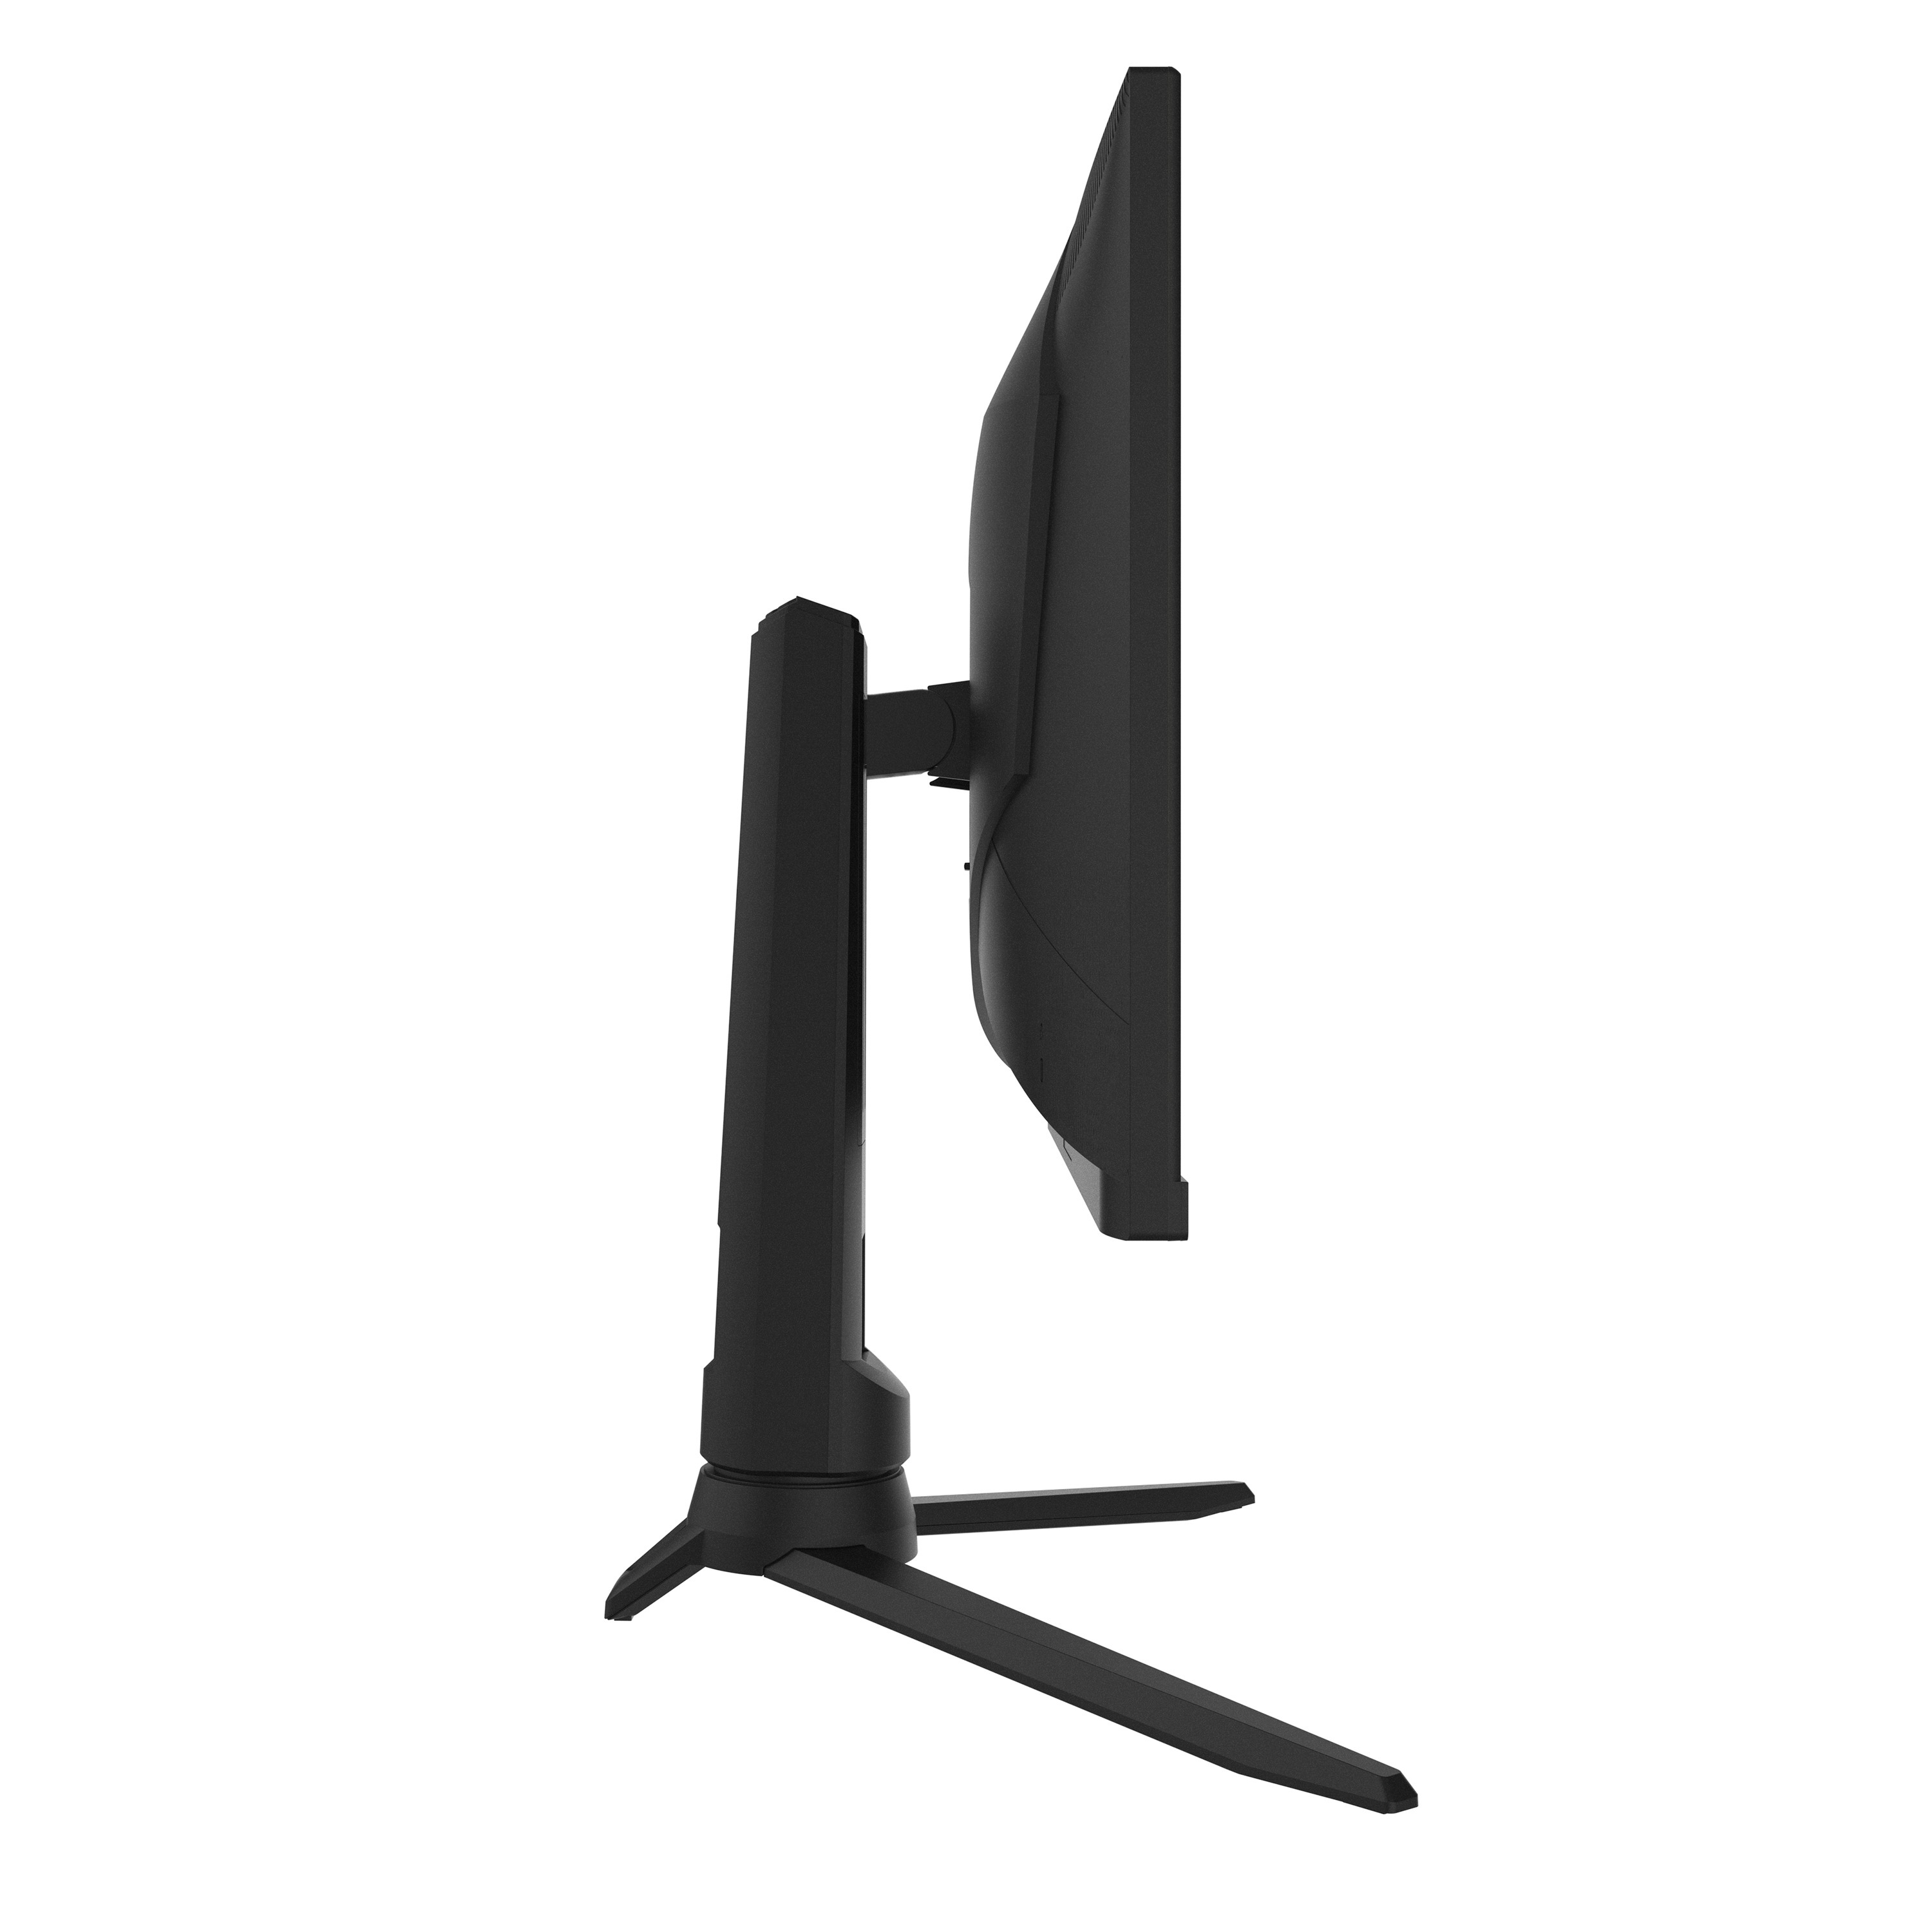 PX248 Pro Gaming Monitor